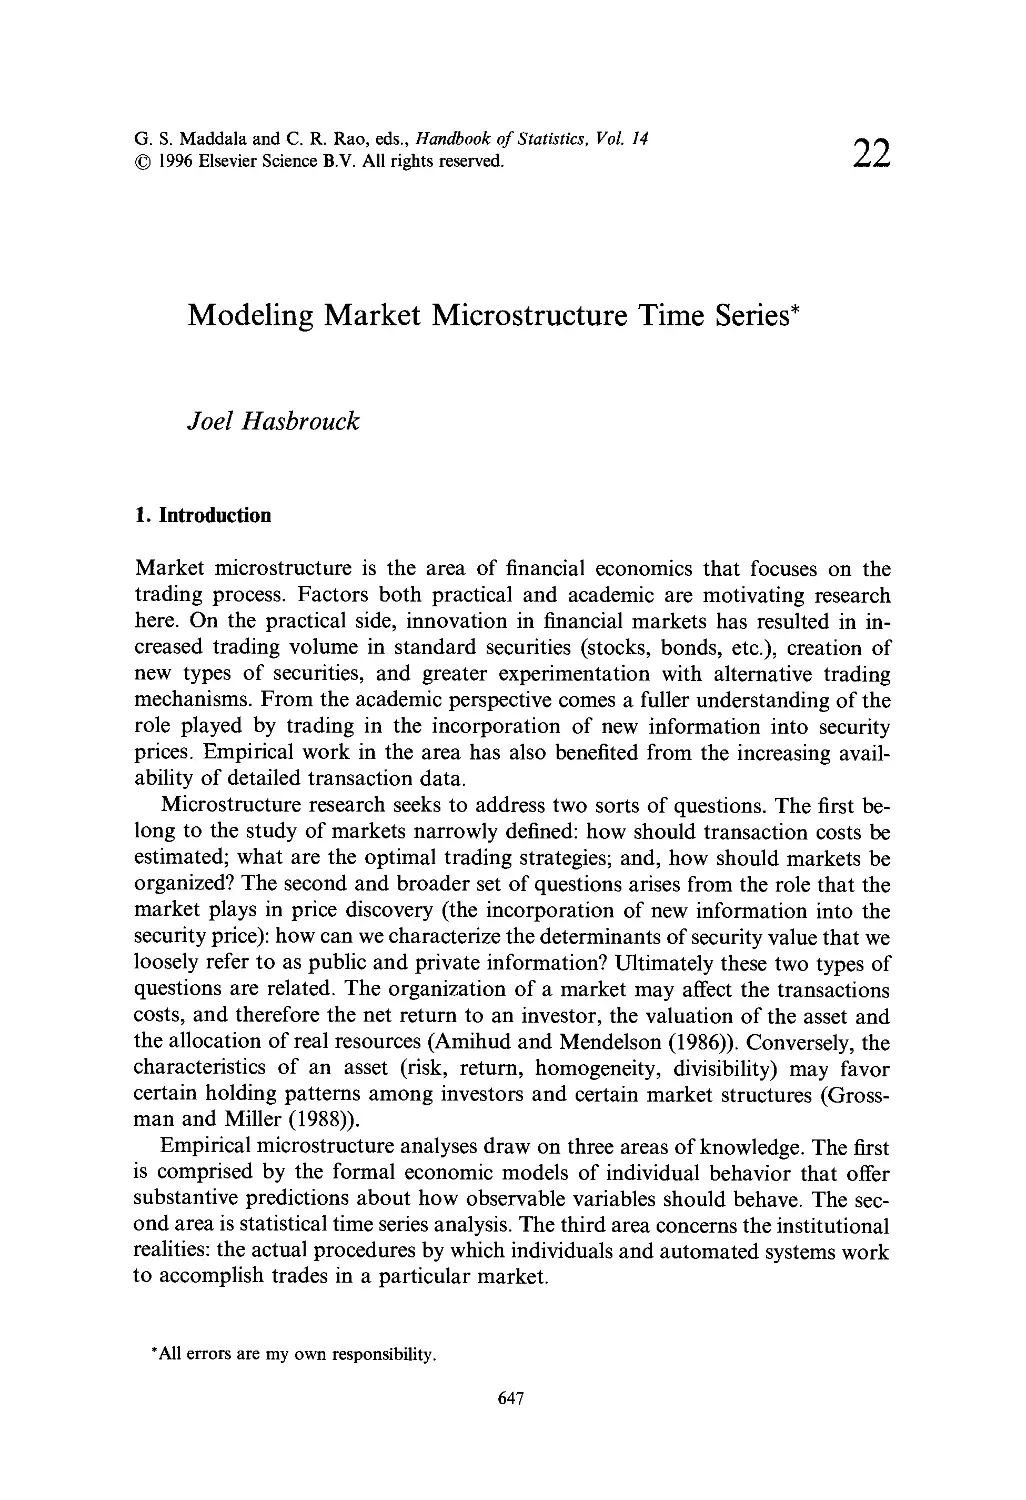 22. Modeling Market Microstructure Time Series